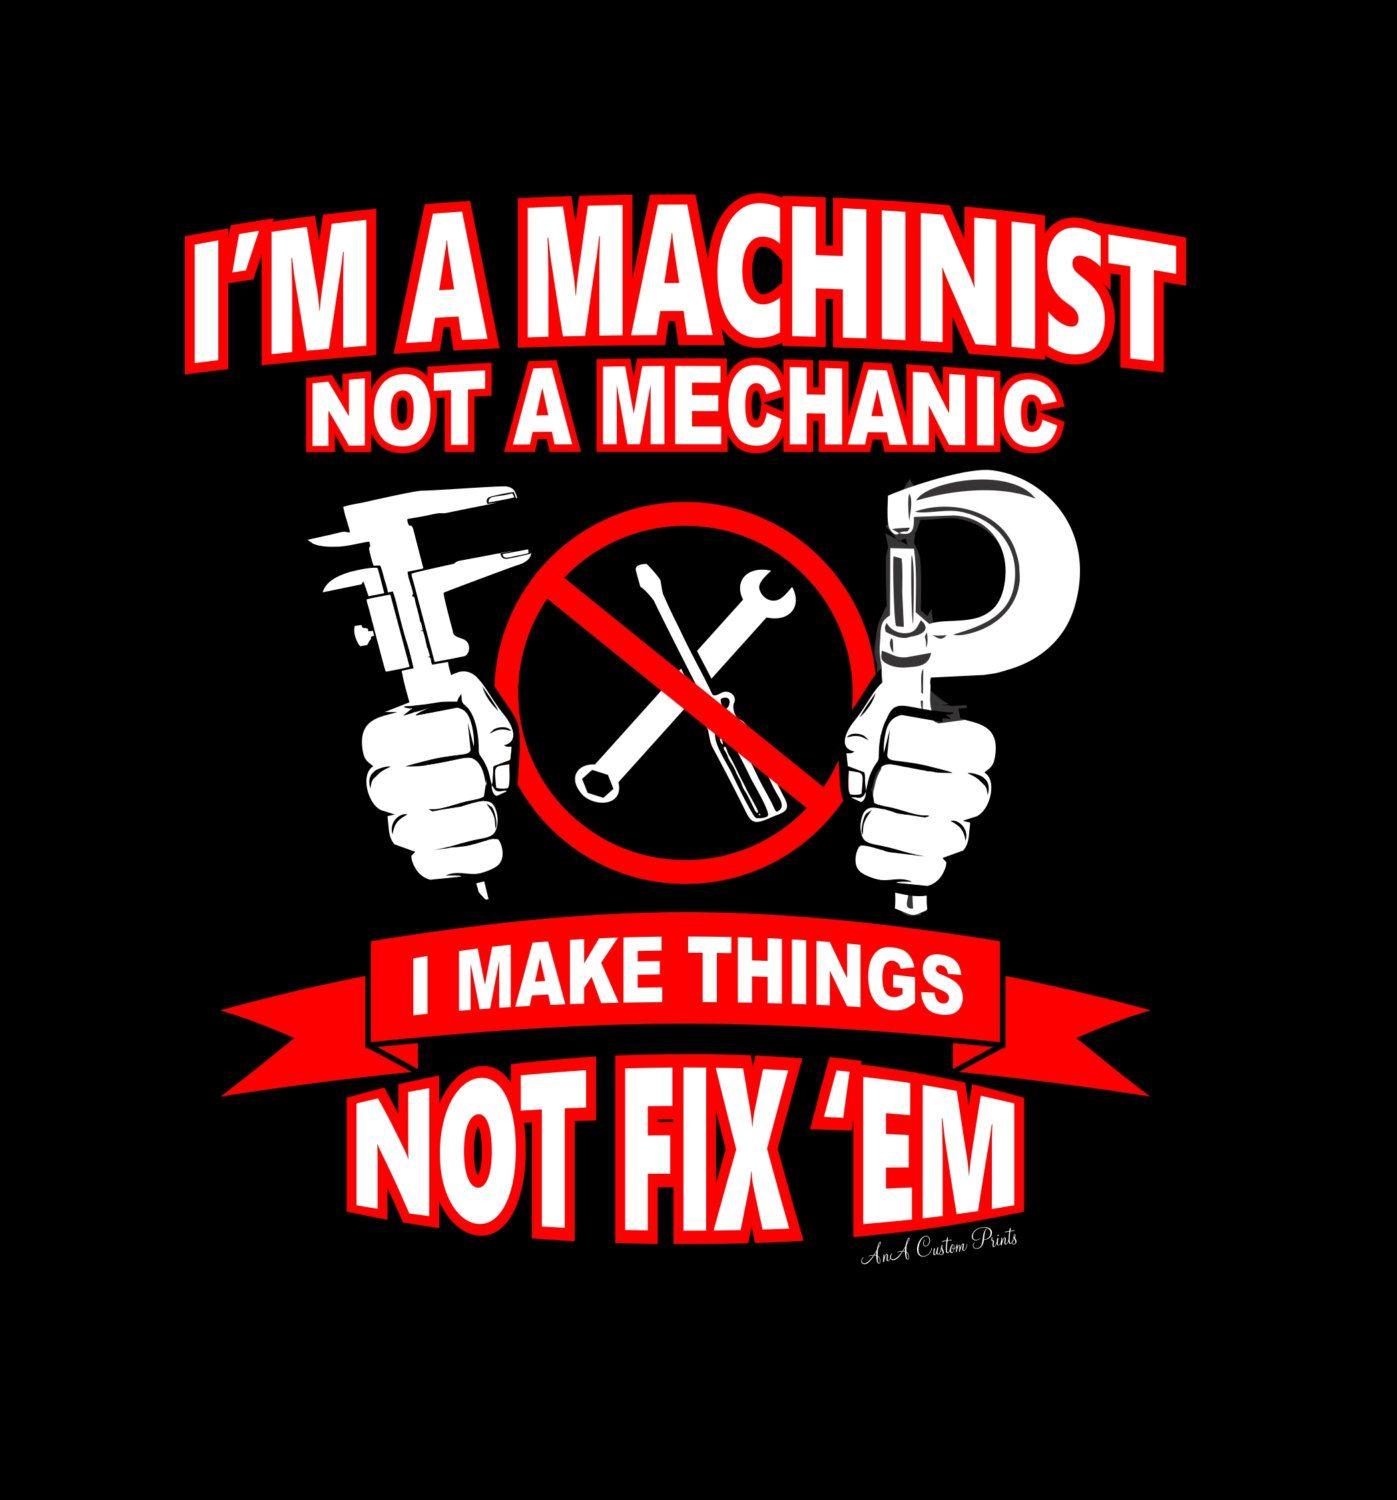 Machinist Logo - I'm A Machinist Not A Mechanic T Shirt. Inspired By The Job